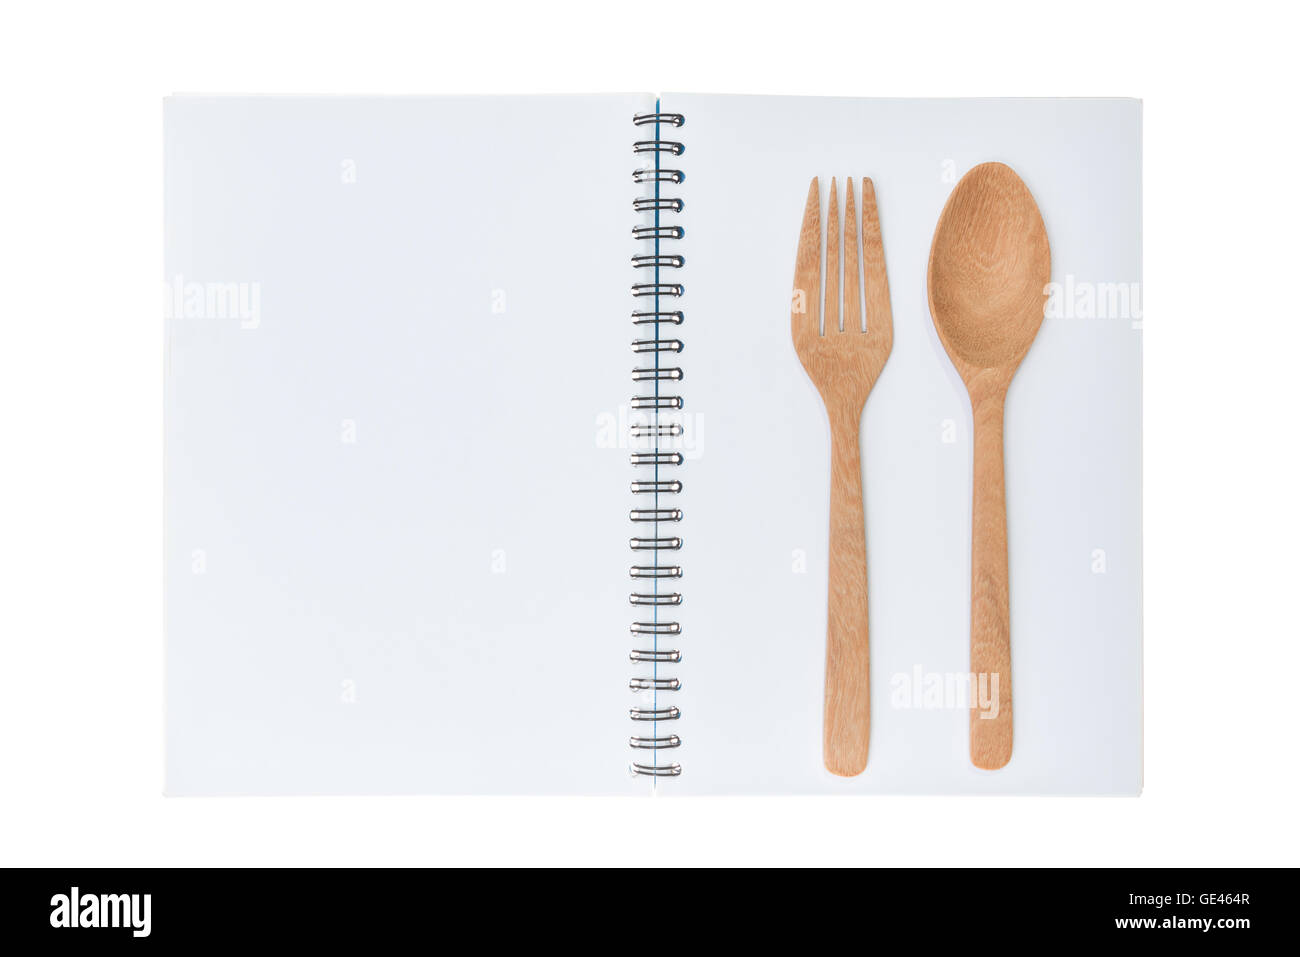 https://c8.alamy.com/comp/GE464R/blank-notebook-for-recipe-with-wooden-spoon-and-fork-GE464R.jpg